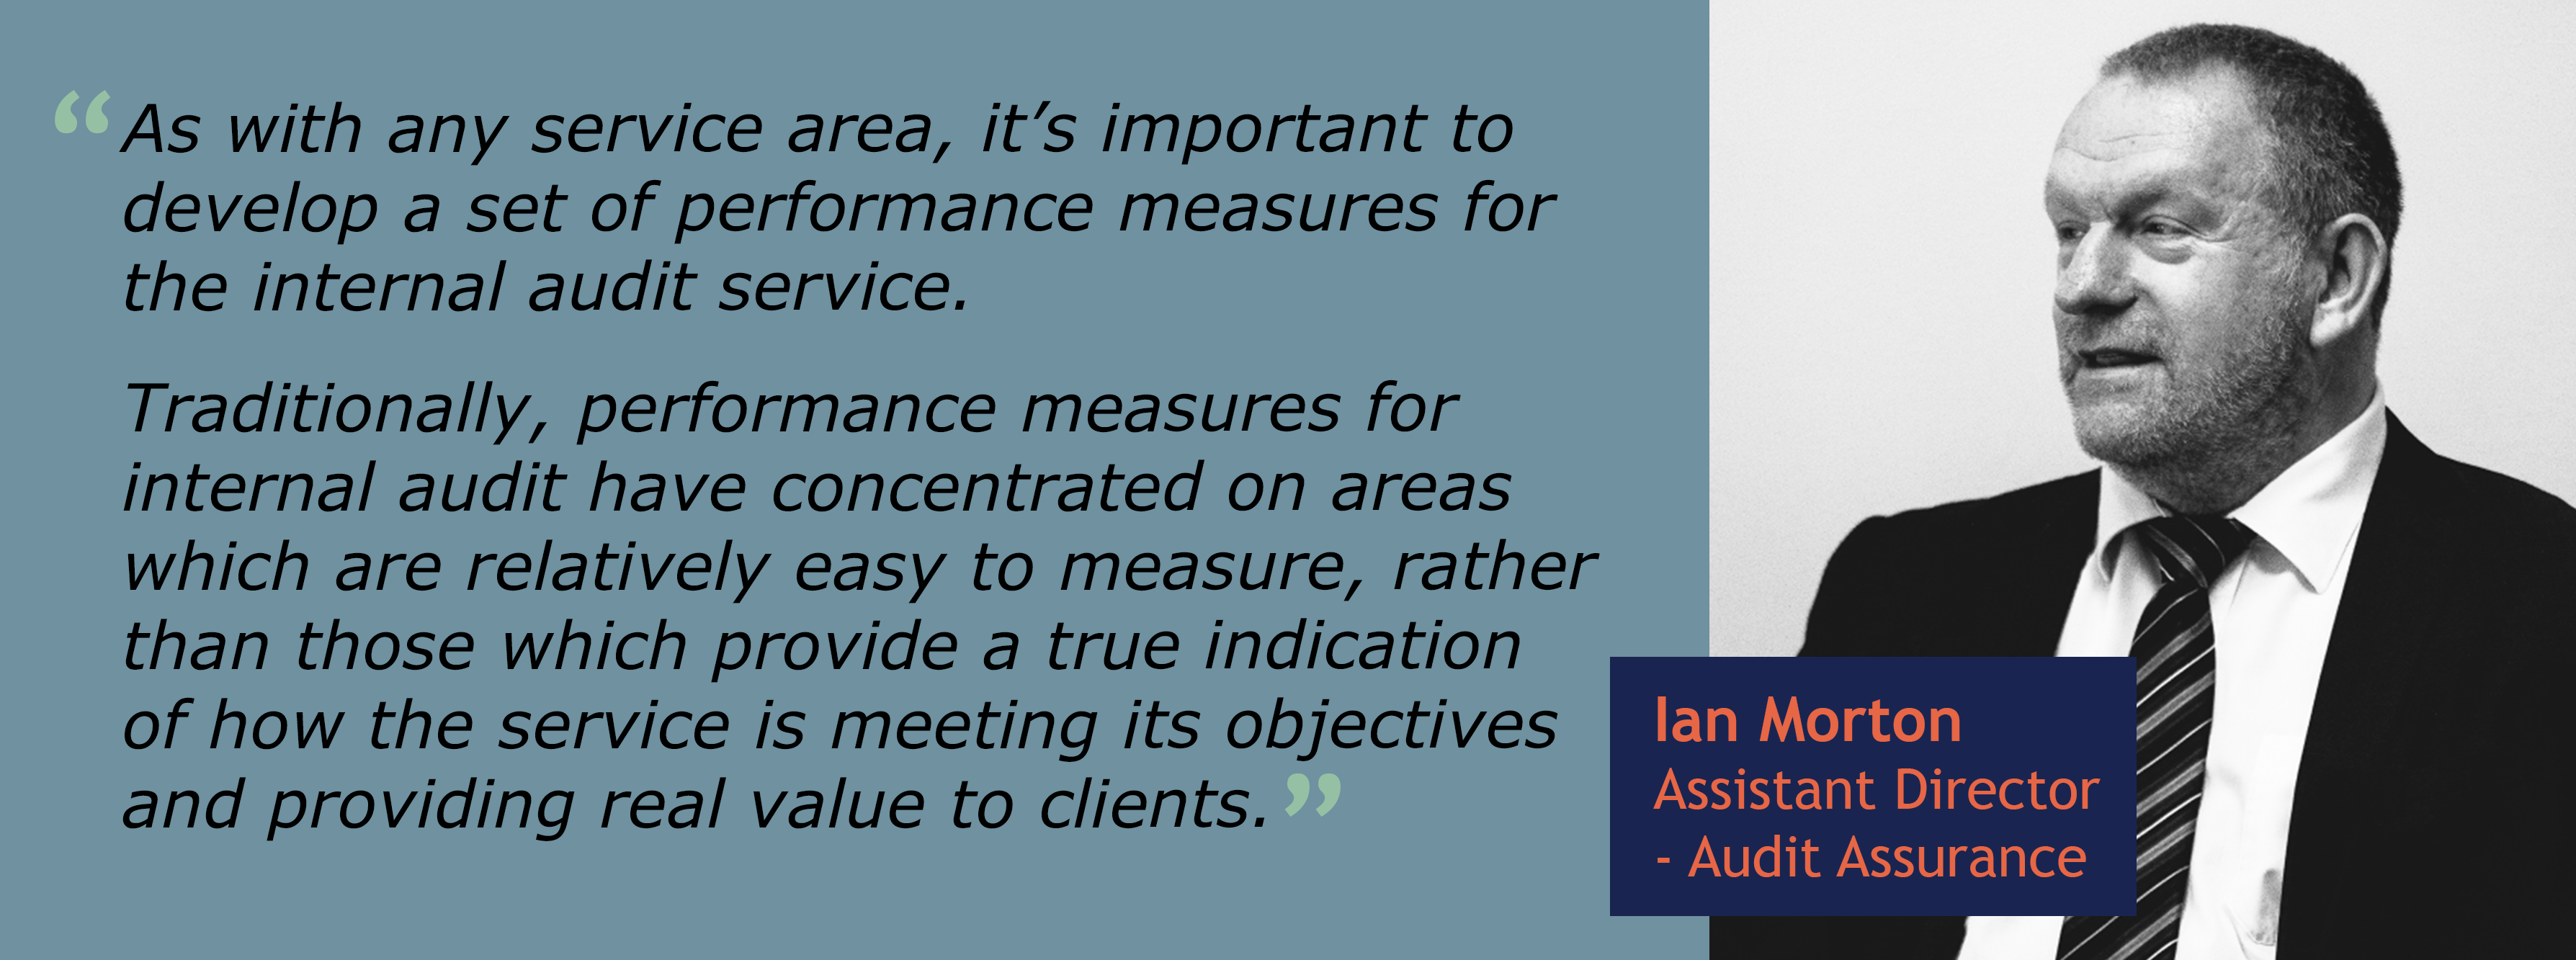 Internal audit KPIs & added value. Headshot of Ian Morton with quote: 